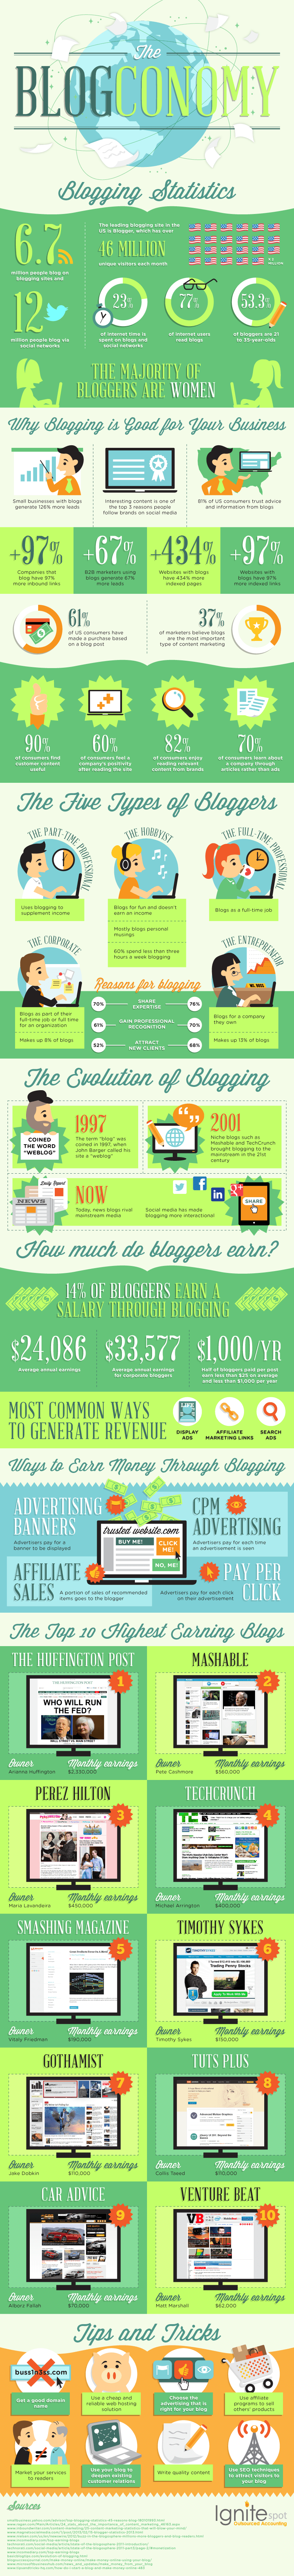 The-blogconomy-infographic[fusion_builder_container hundred_percent=